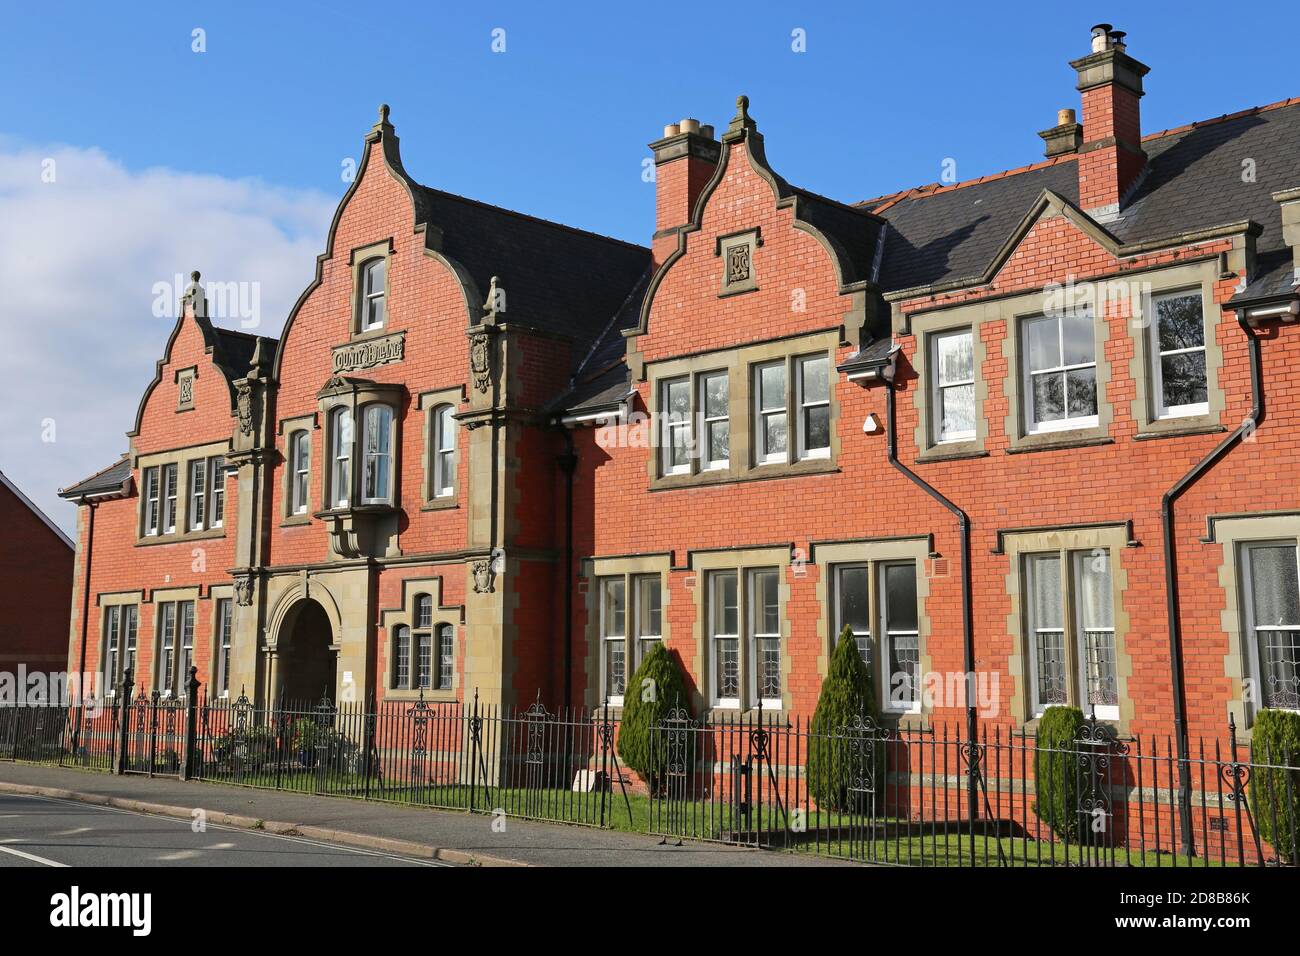 Former Magistrates' Court, County Buildings, High Street, Llandrindod Wells, Radnorshire, Powys, Wales, Great Britain, United Kingdom, UK, Europe Stock Photo